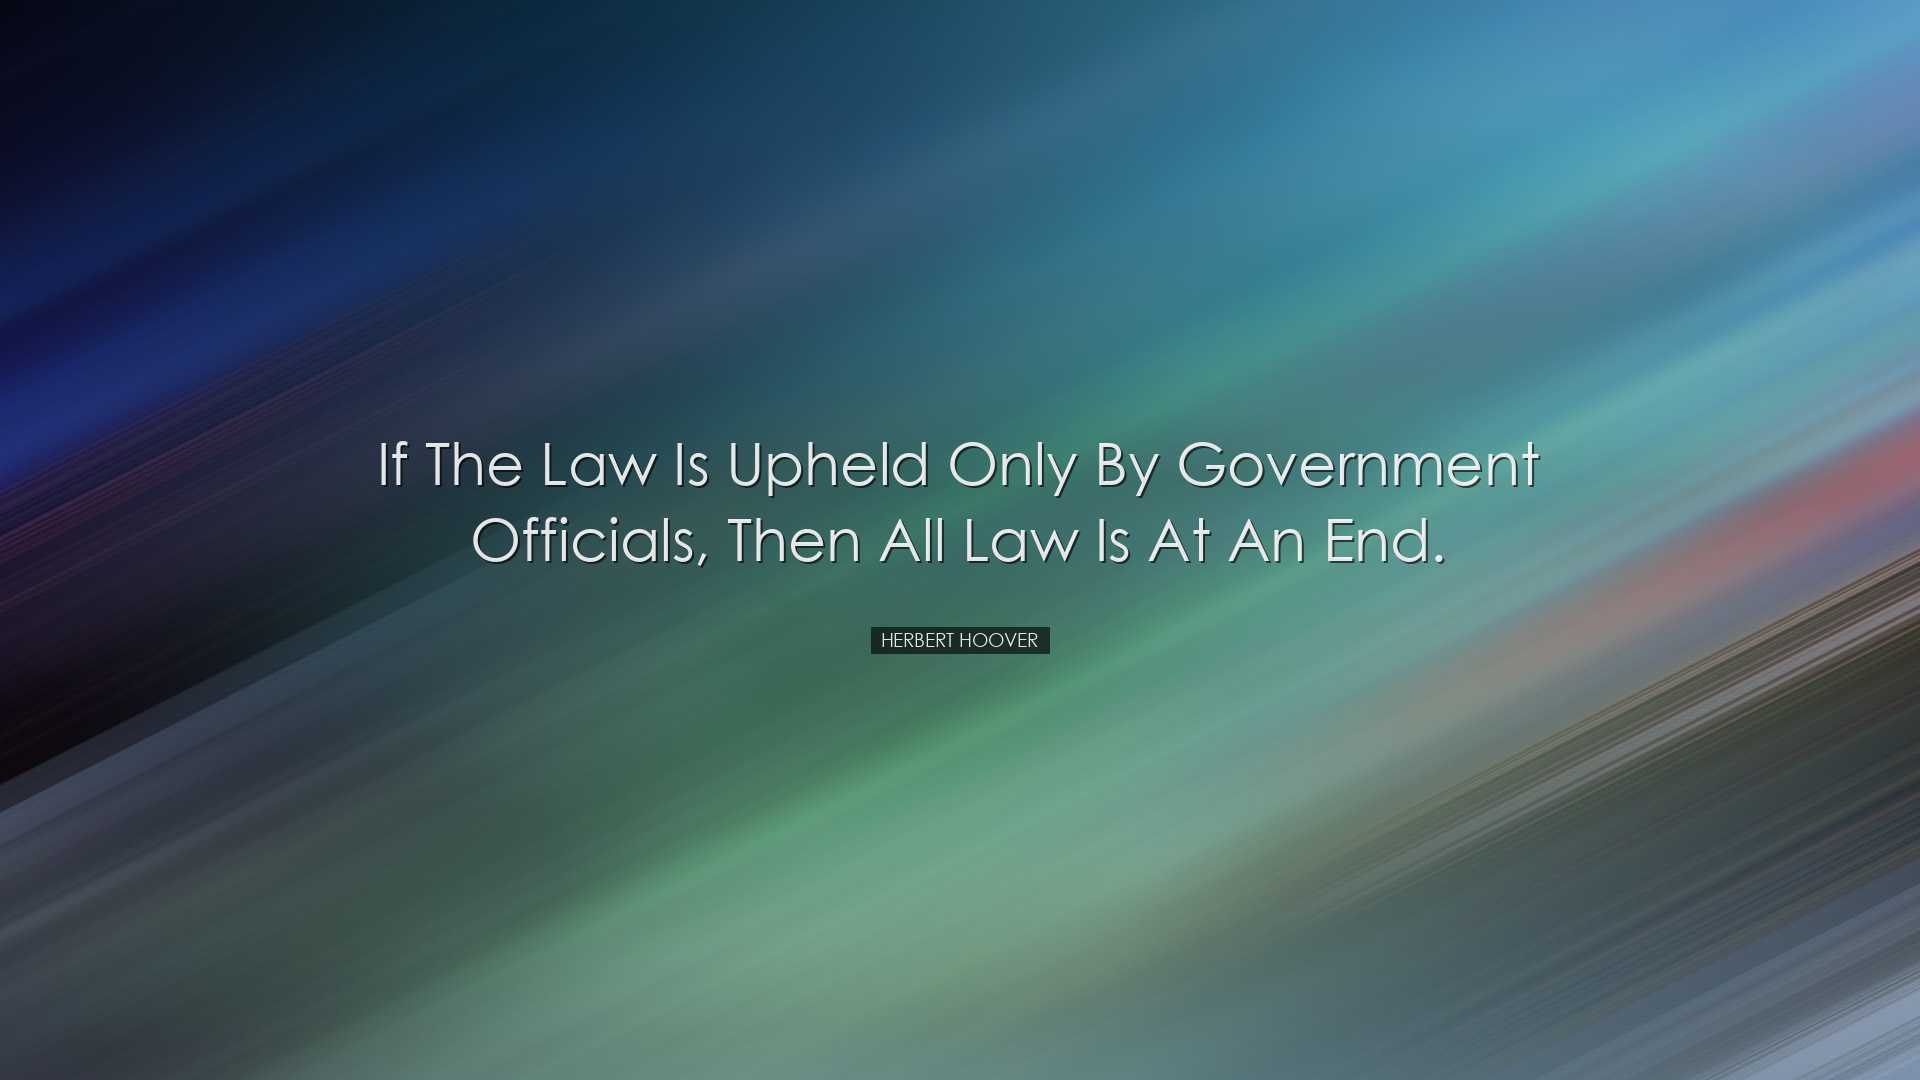 If the law is upheld only by government officials, then all law is